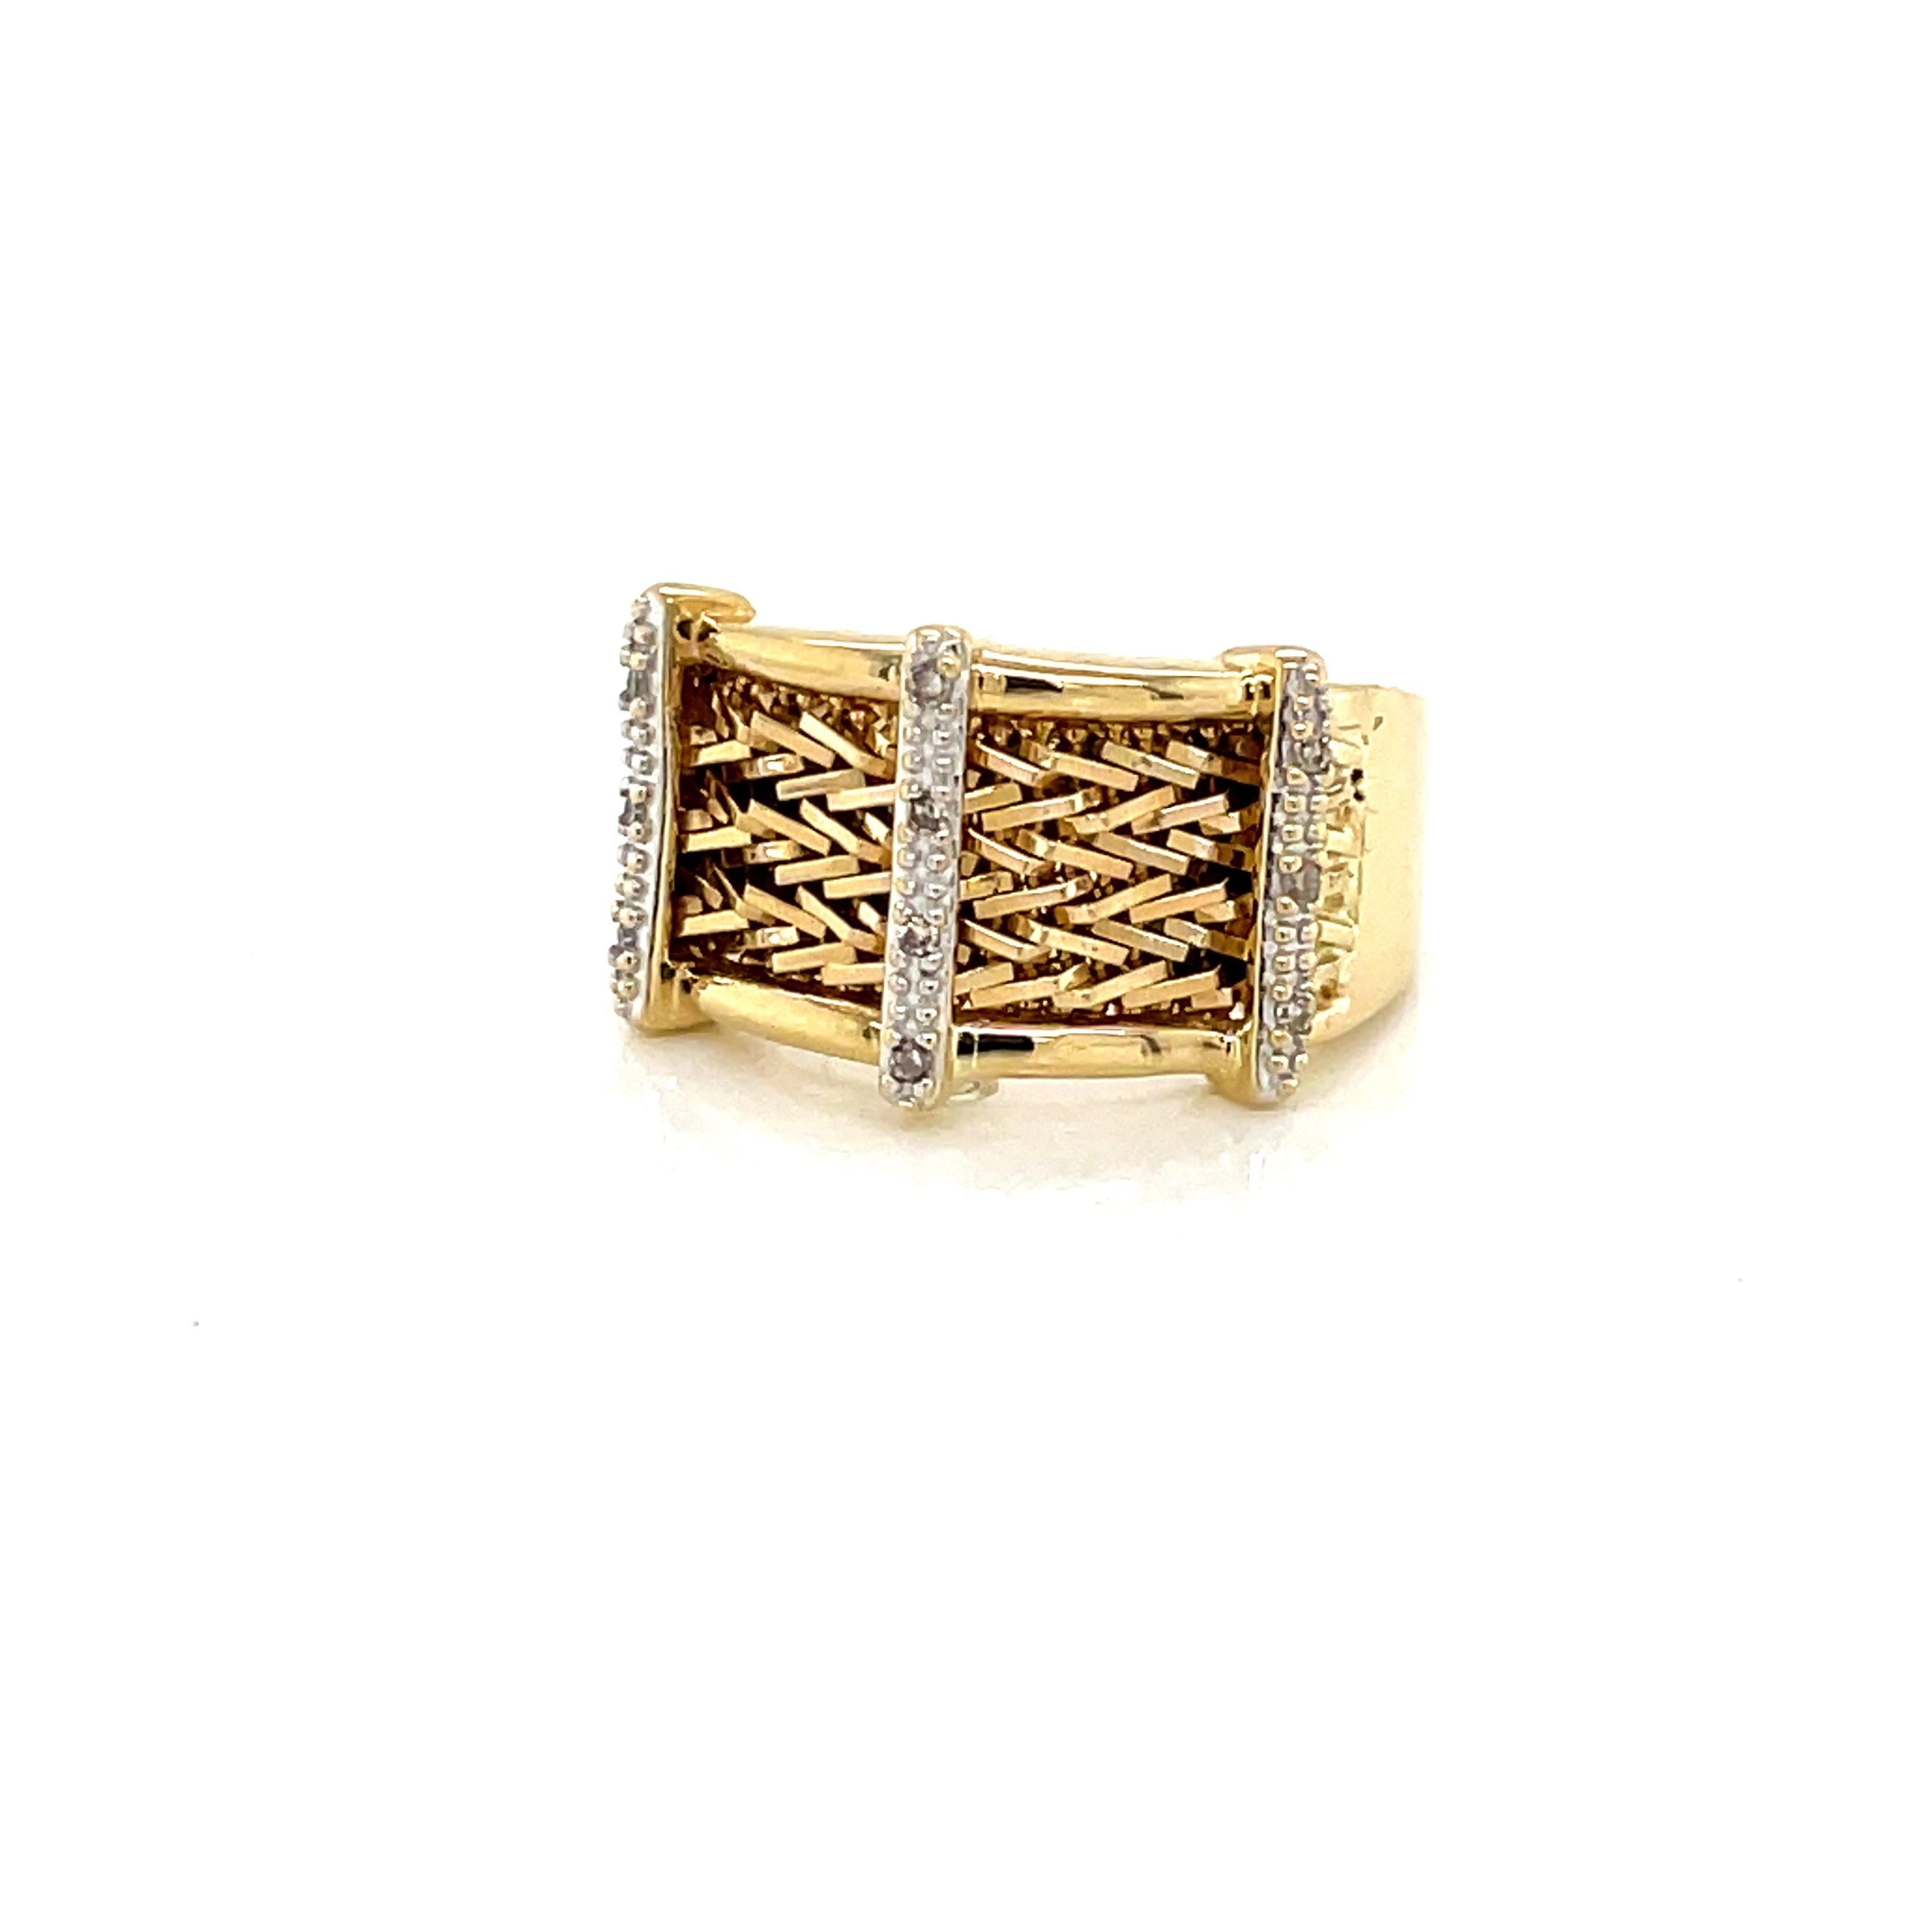 14 Karat Woven Yellow Gold Band Ring with Diamond Accents In Excellent Condition For Sale In Mount Kisco, NY